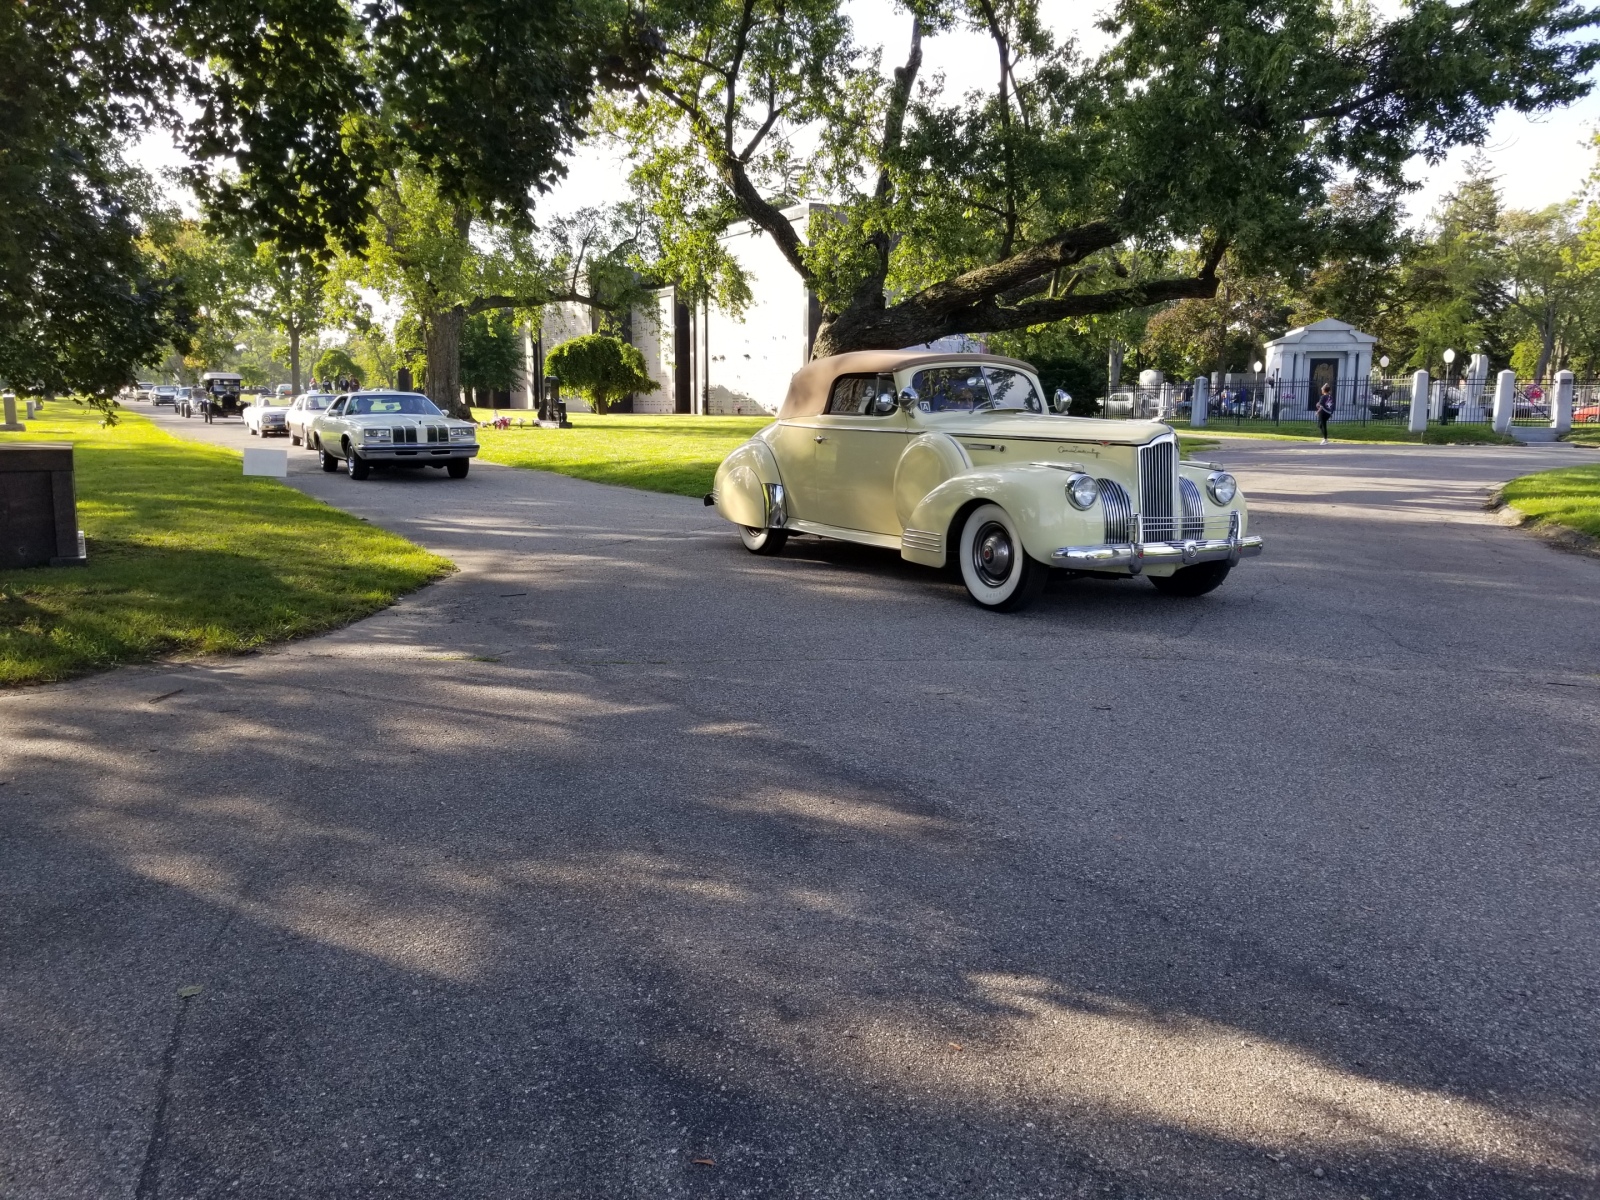 1941 Packard 120 1901 Convertible Coupe